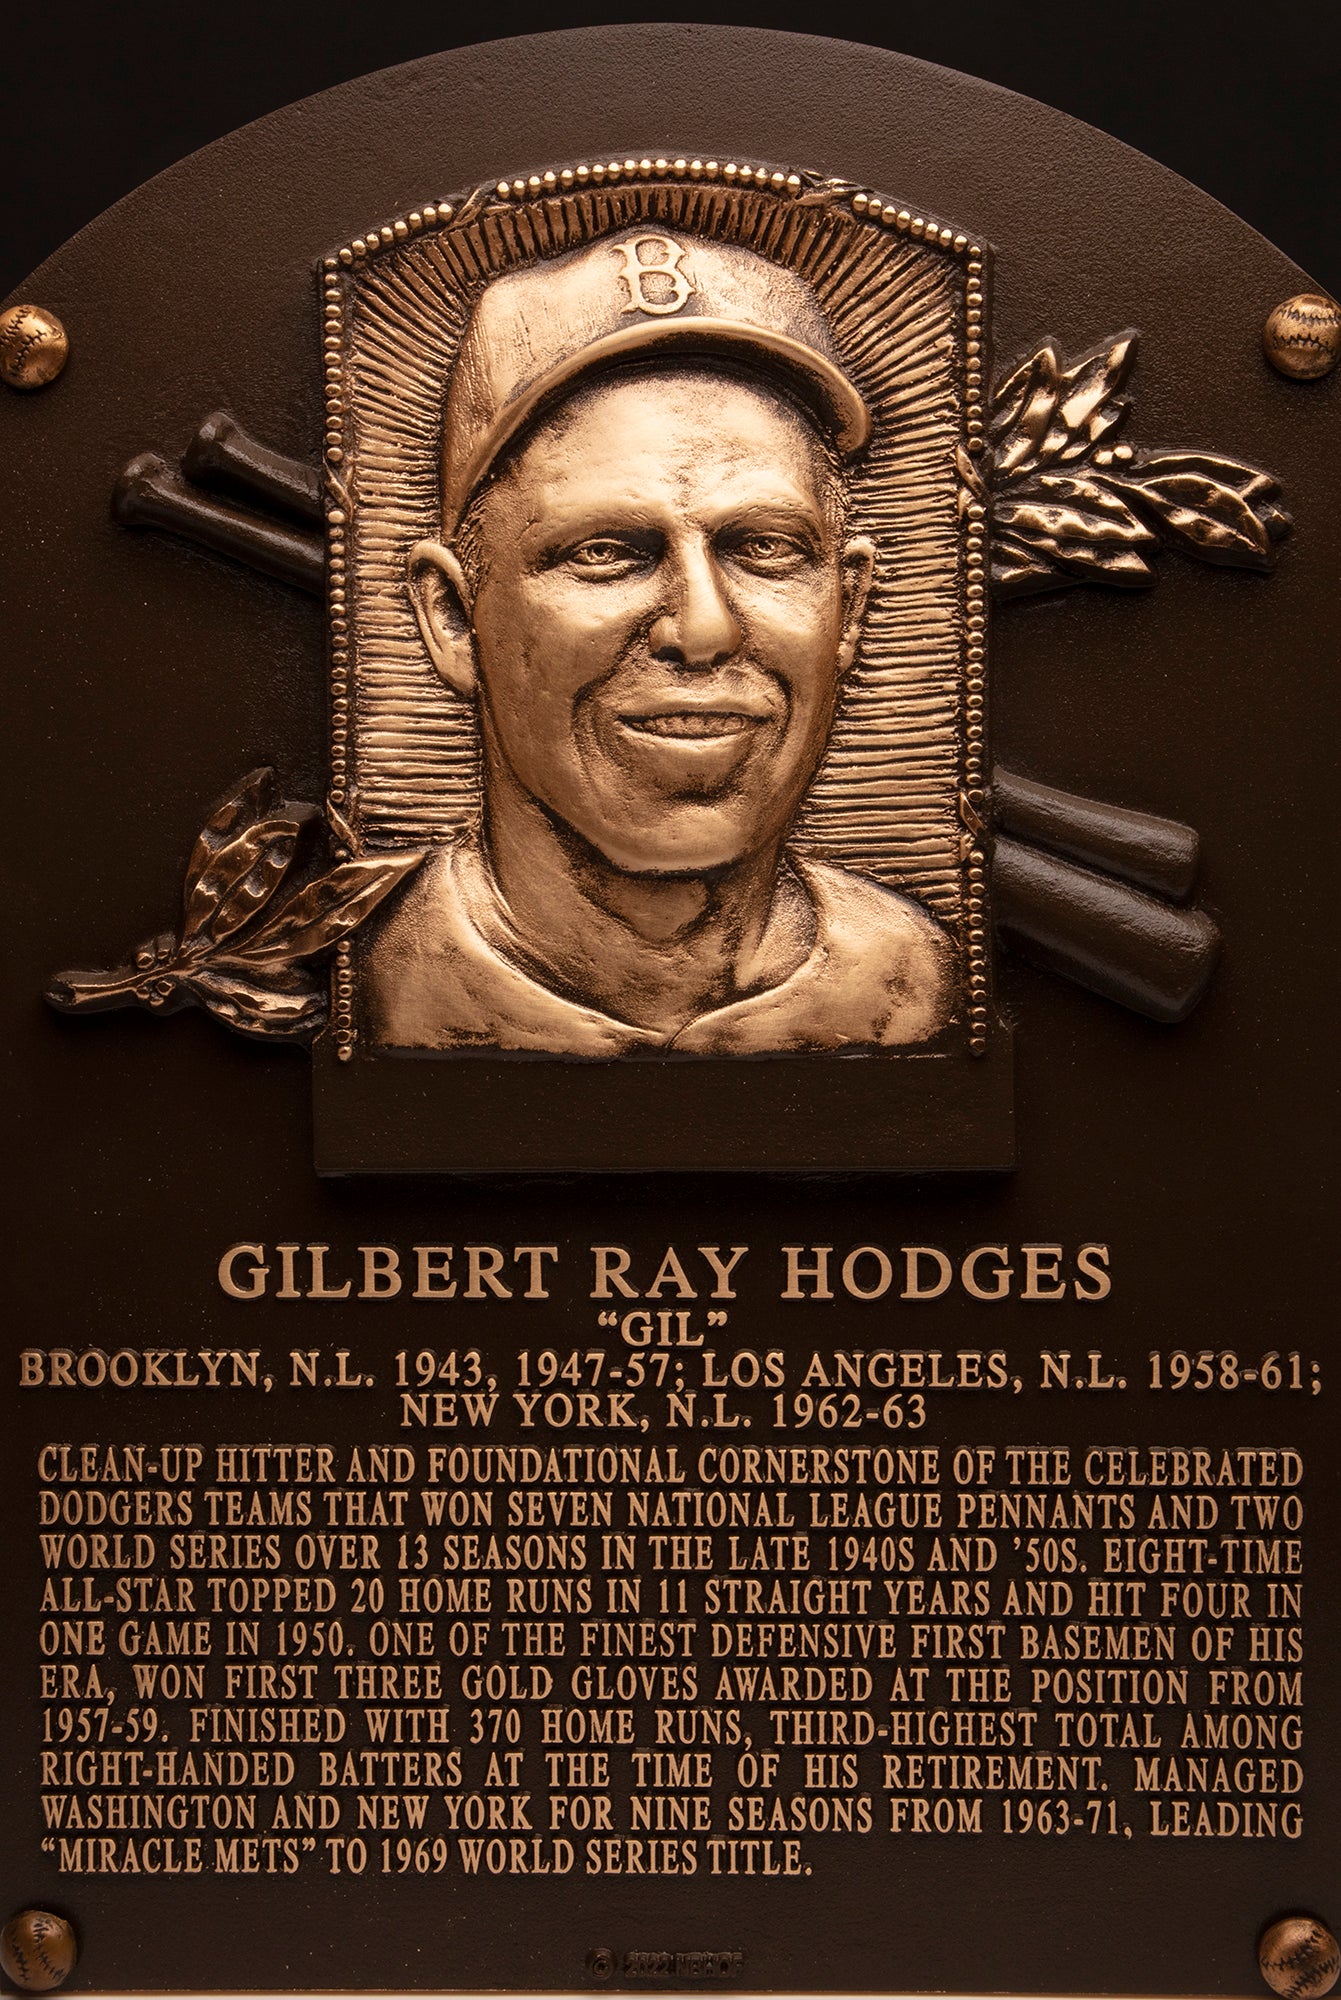 Gil Hodges Hall of Fame plaque